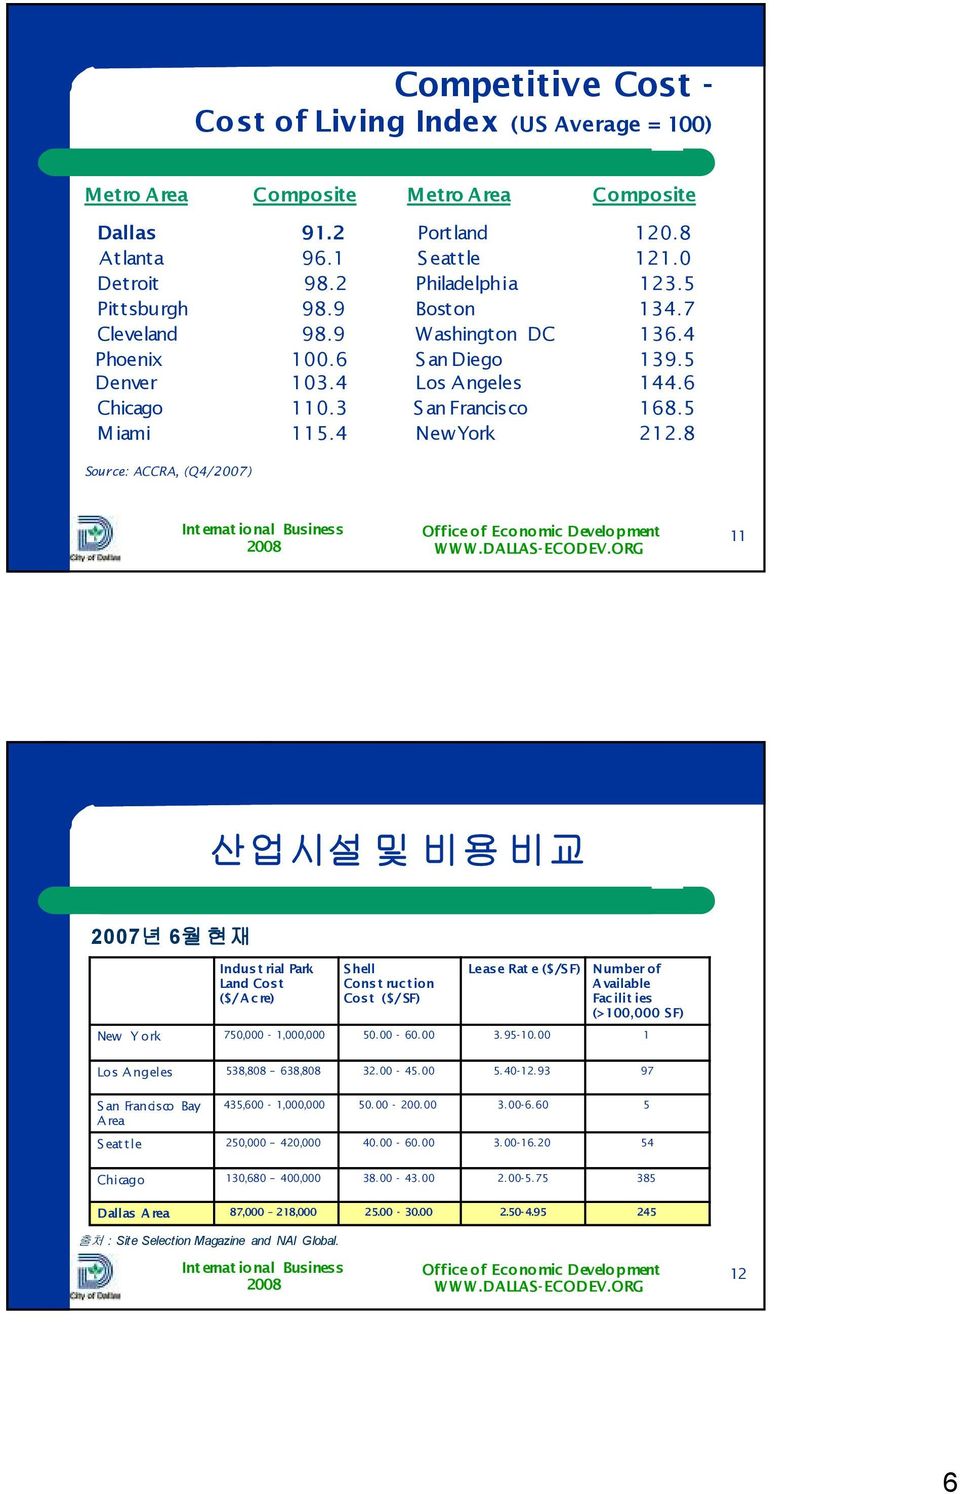 8 Source: ACCRA, (Q4/2007) 11 산업시설 및 비용 비교 2007년 6월 현재 Indust rial Park Land Cost ($/Acre) Shell Const ruction Cost ($/SF) Lease Rat e ($/SF) Number of Available Facilit ies (>100,000 SF) New Y ork